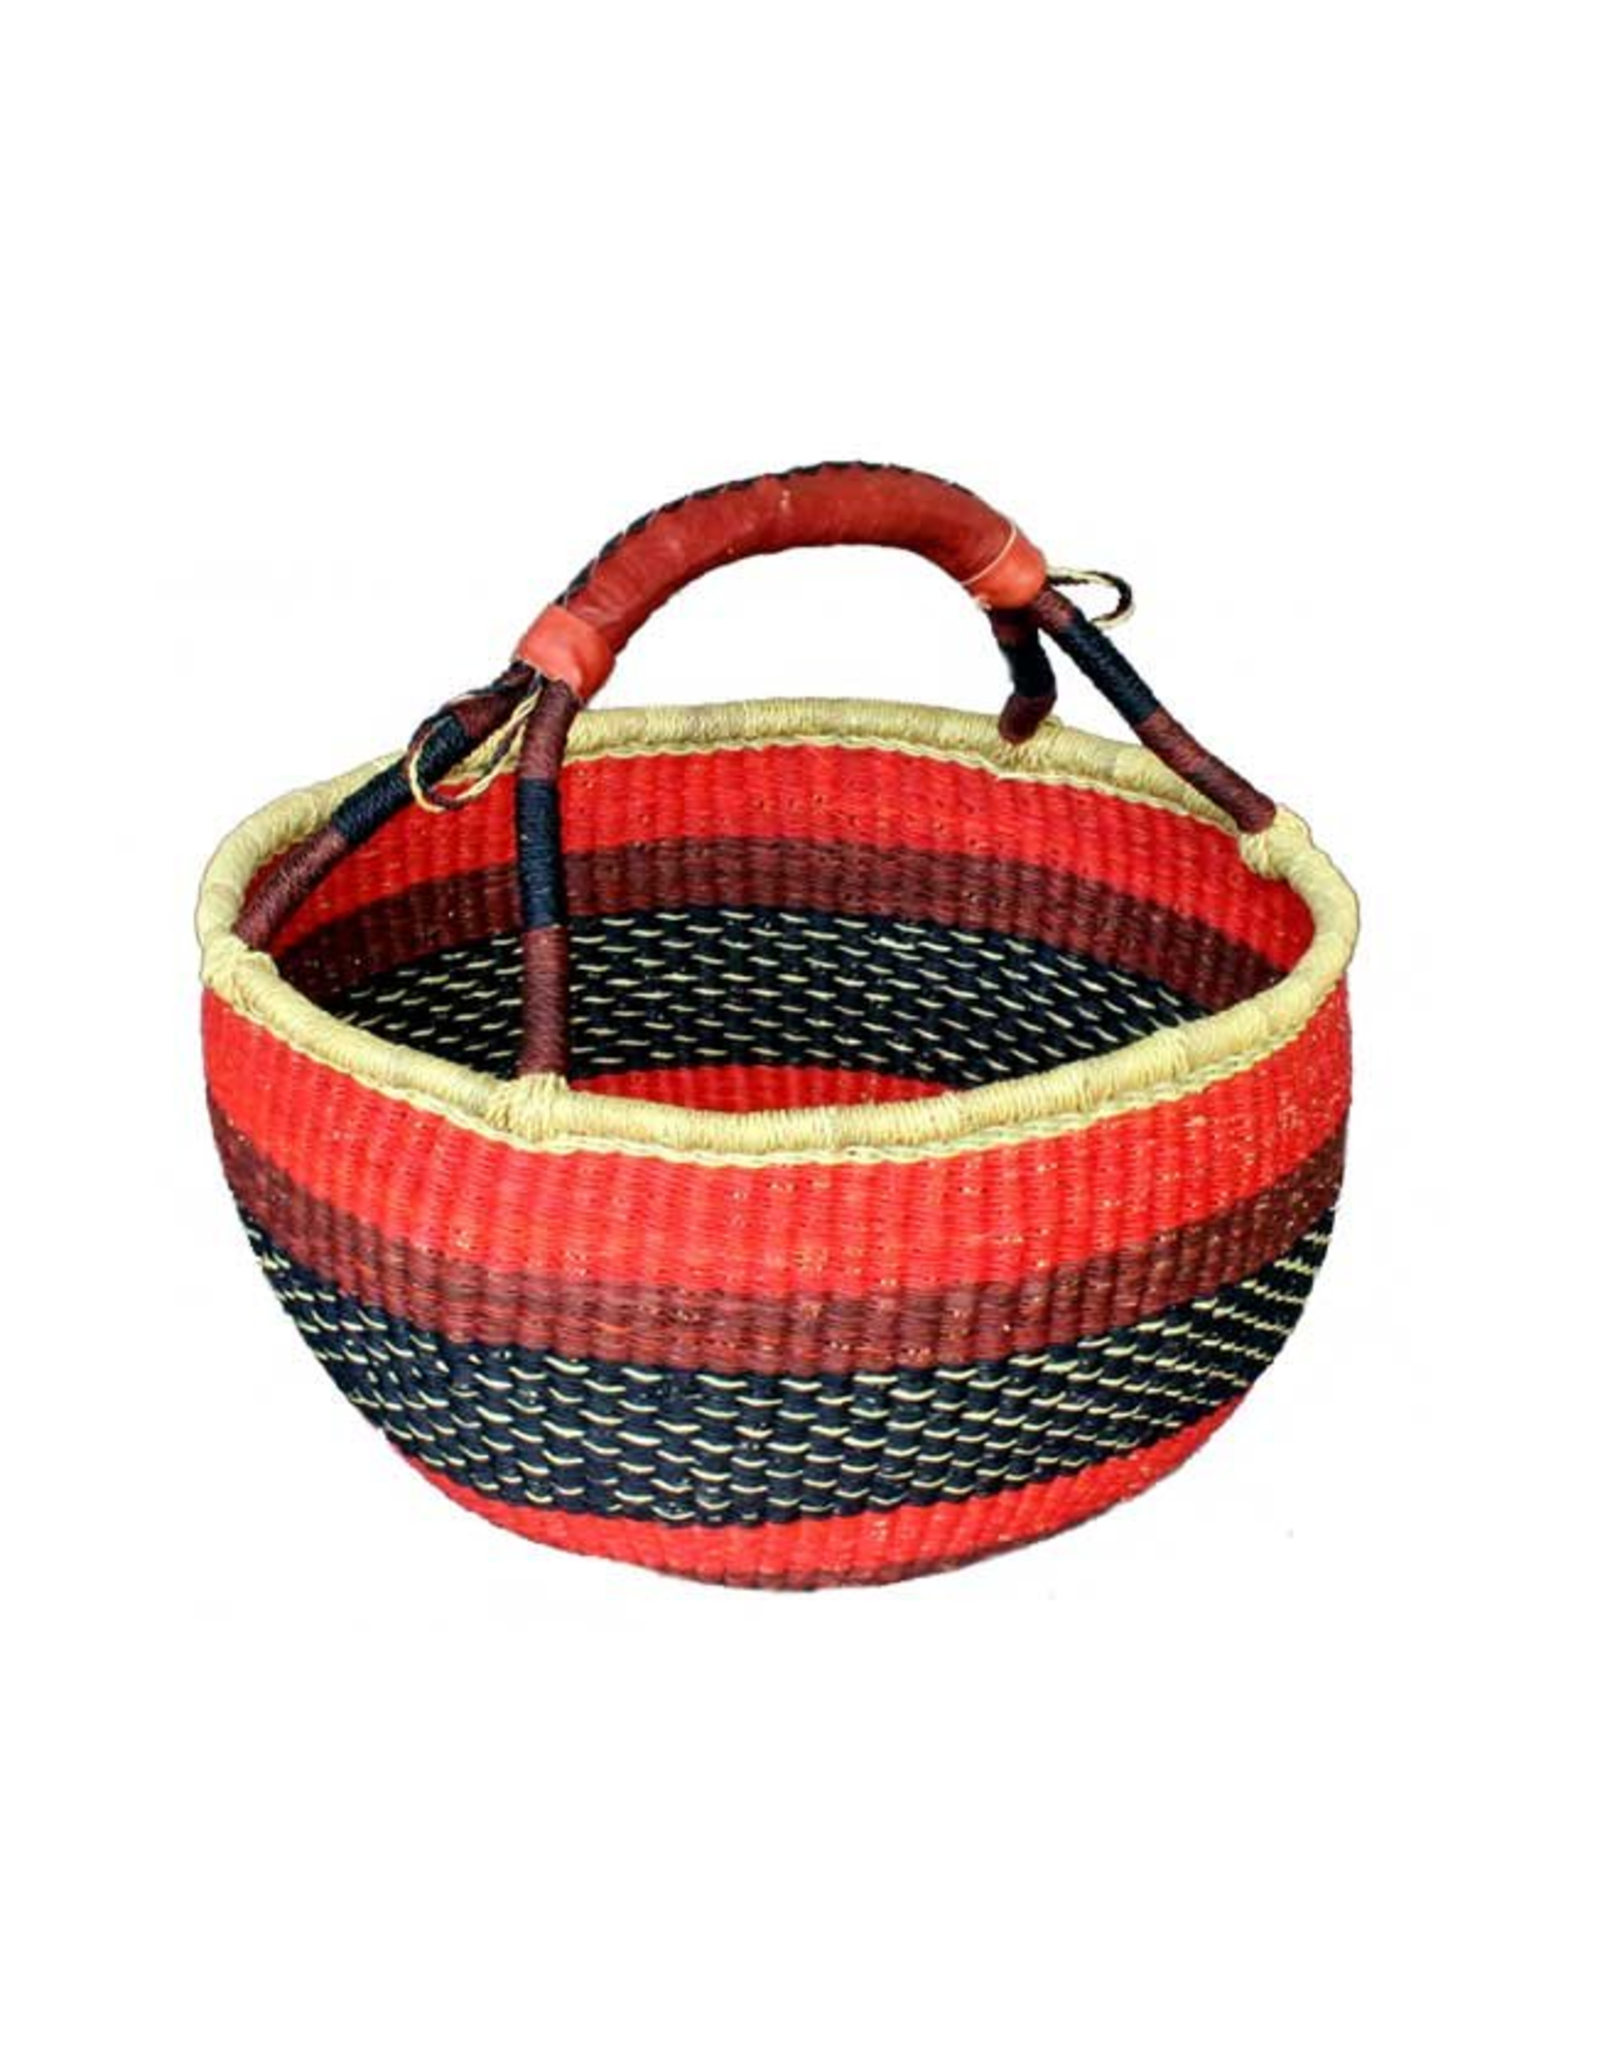 Trade roots Woven Grass Mini Round Basket w/ Leather Handle, Ghana